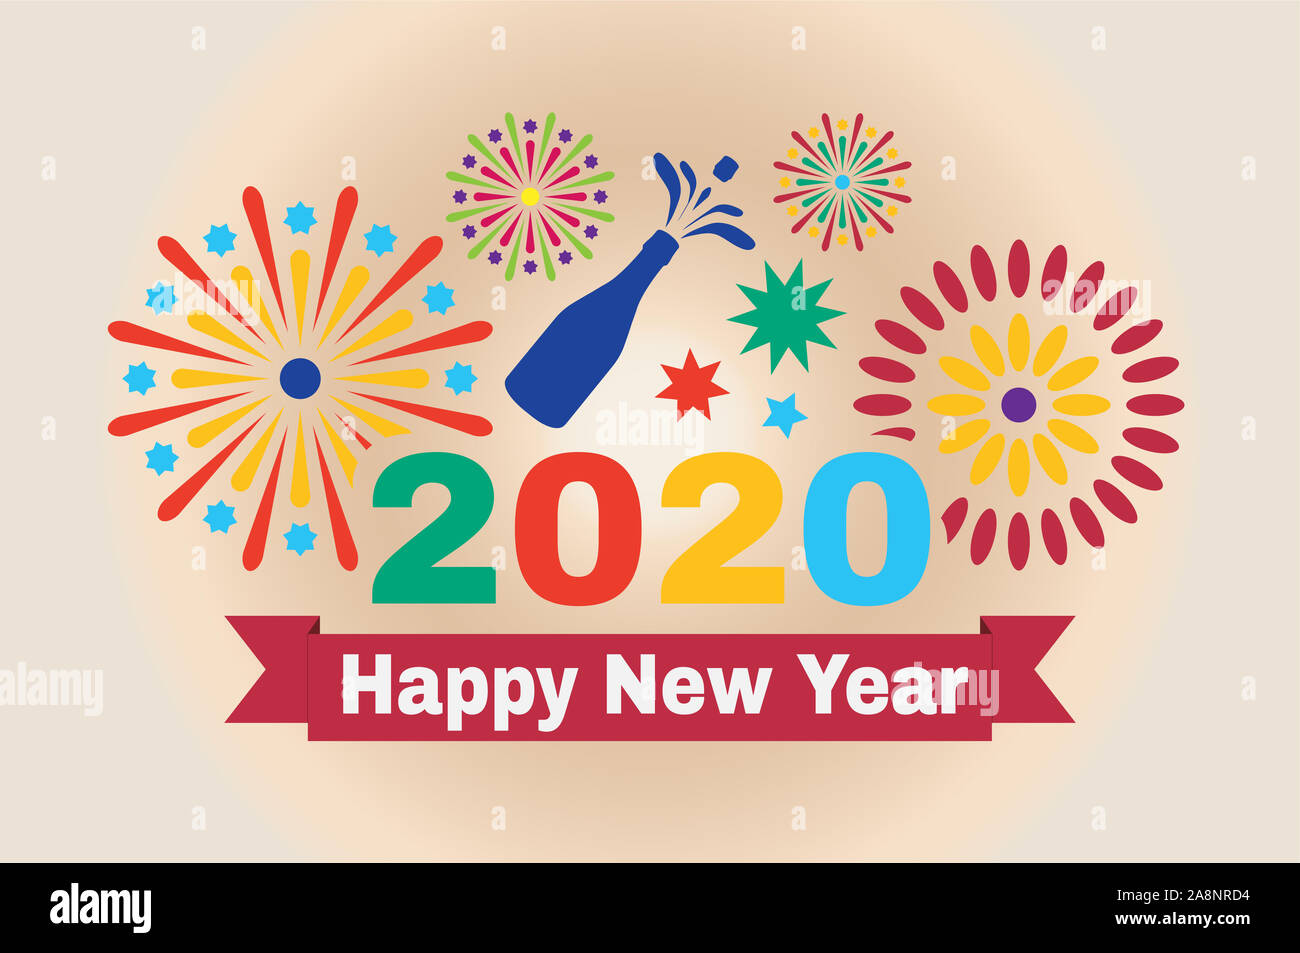 Picture for the New Year. Inscription Happy New Year 2020 and fireworks in vector illustration. Stock Photo